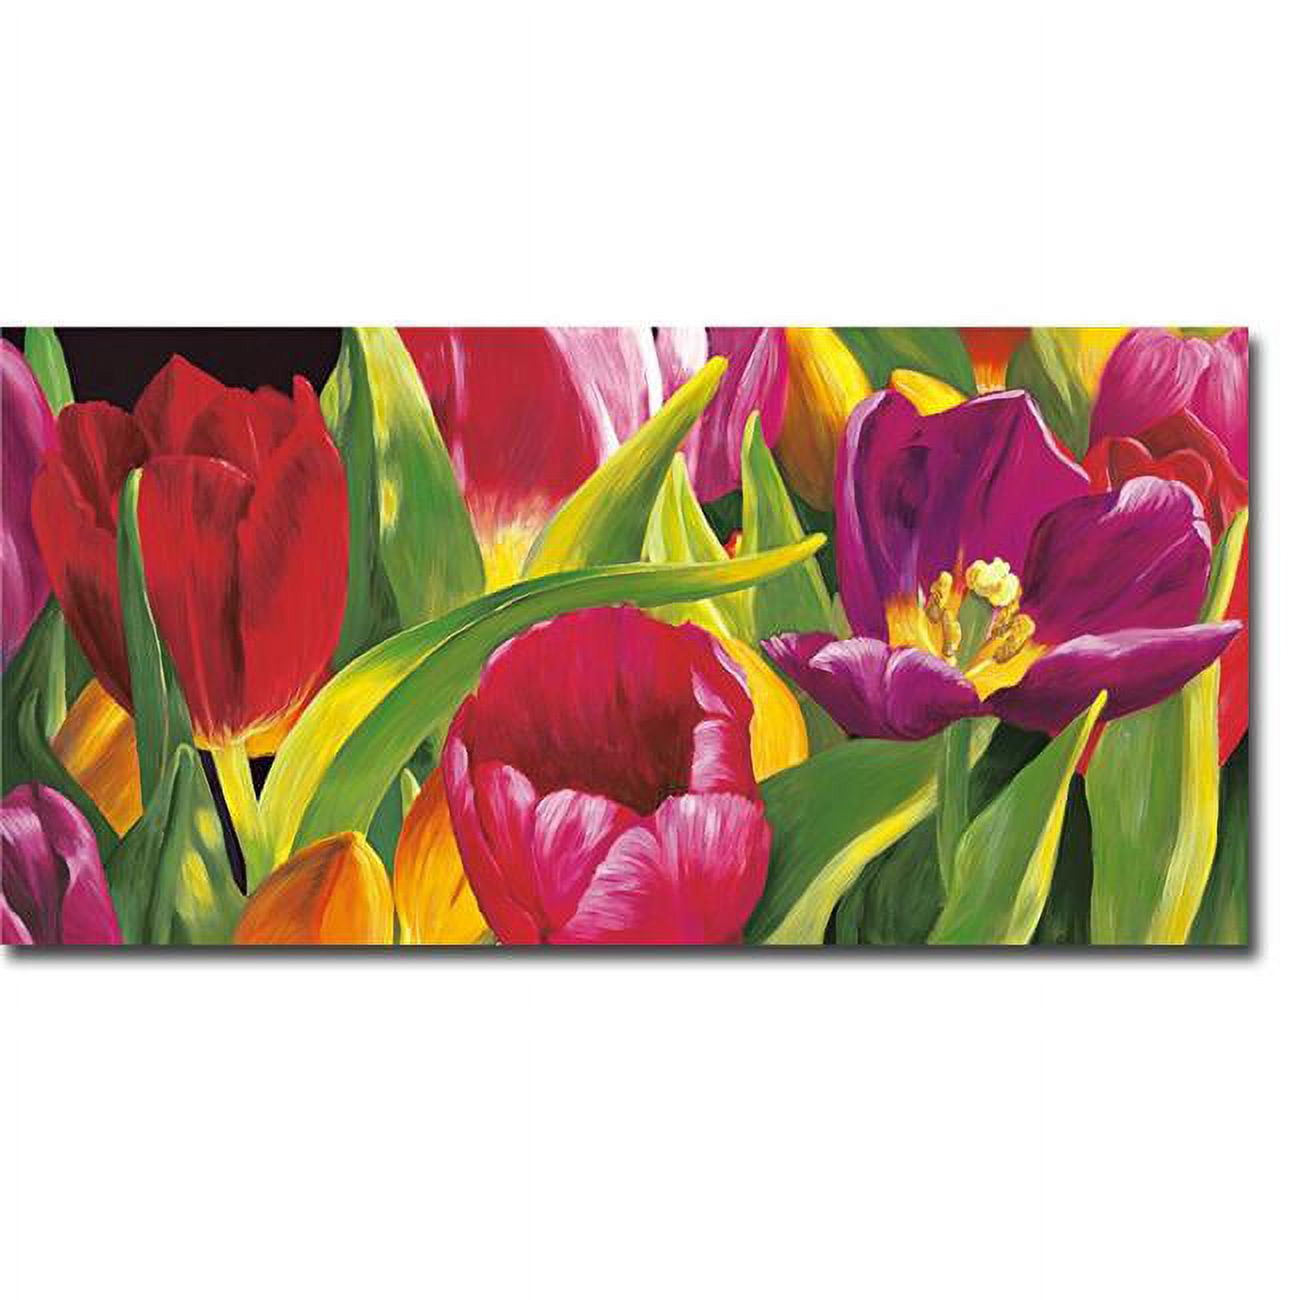 1224757tg The Spring By Laura Martin Premium Gallery-wrapped Canvas Giclee Art - Ready To Hang, 12 X 24 In.